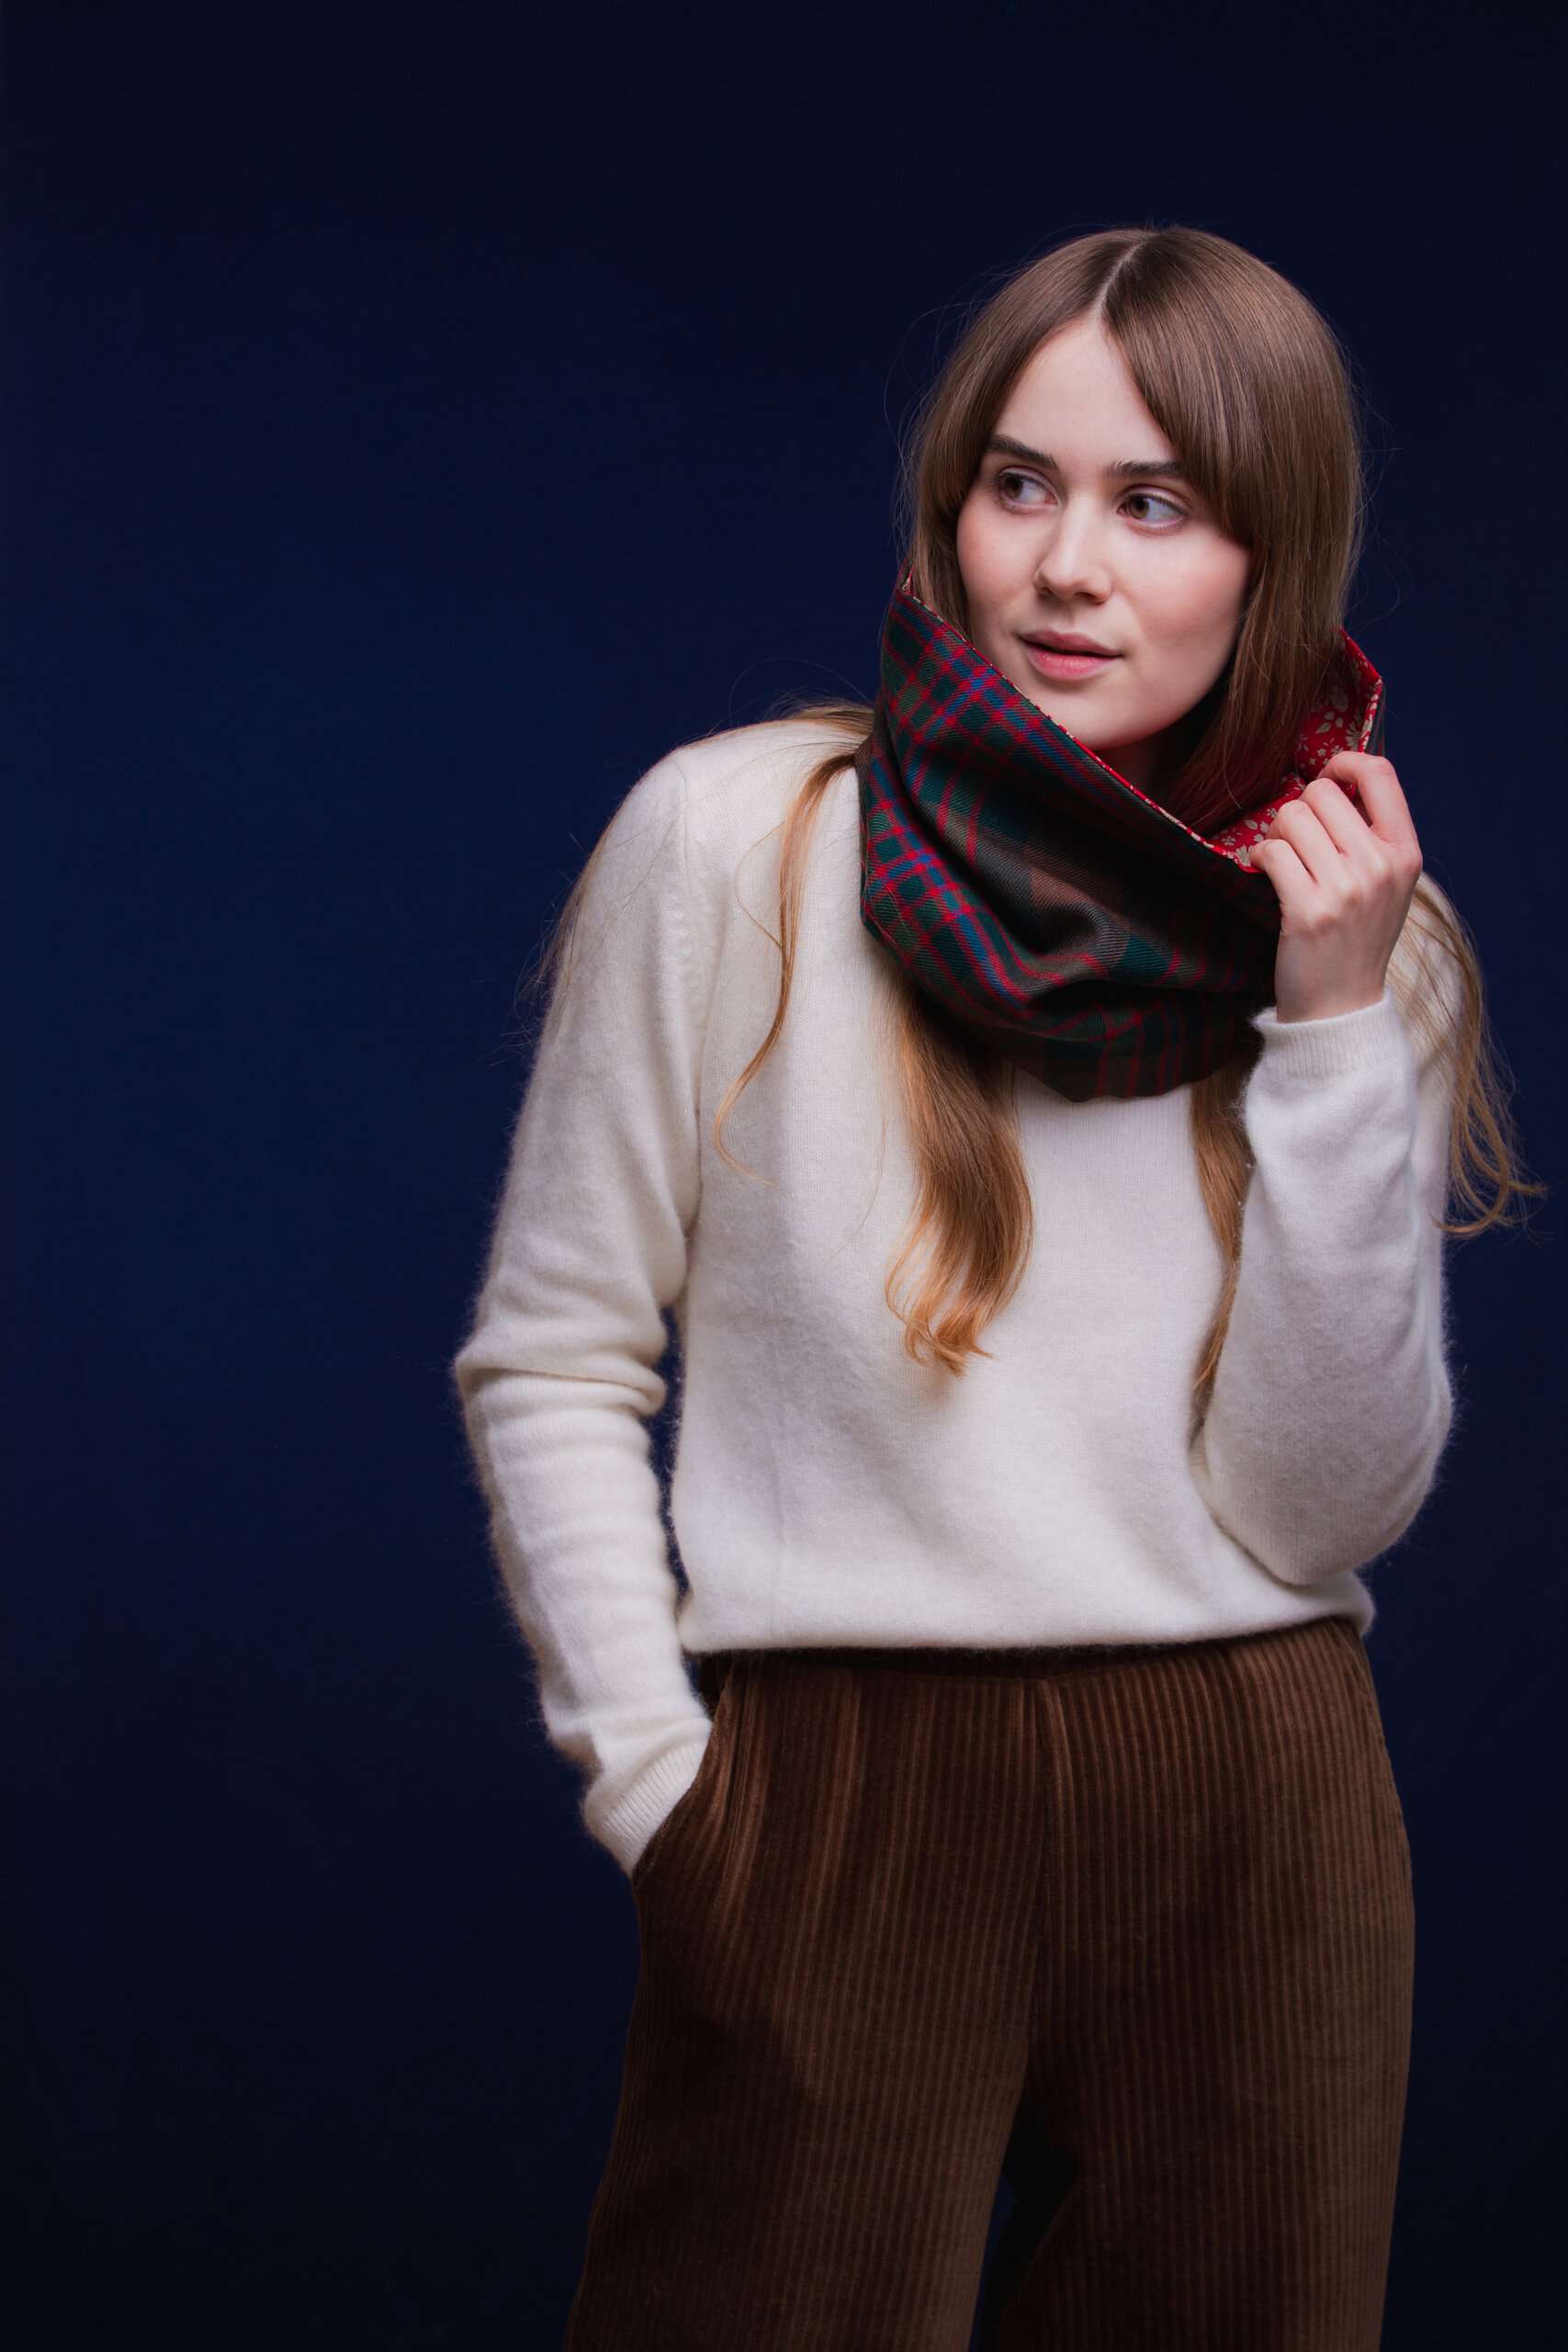 LoullyMakes Studio 4 51 scaled Classic Cowl in our own exclusive John Muir Way Tartan with Liberty Print tana lawn cotton lining. Simply select your choice of coloured lining from the drop-down menu. ( The example cowl pictured here features lining 5 ) This easy-to-wear cowl combines effortless styling and sublime warmth, being formed from a simple superfine cotton lined "tube" of 100% wool John Muir Way Tartan. Simply pop over your head and wear the cowl high, to keep out the chill, or roll over the neckline to feature a flourish of an iconic art fabric. 100% Wool Tartan, 100% cotton lining